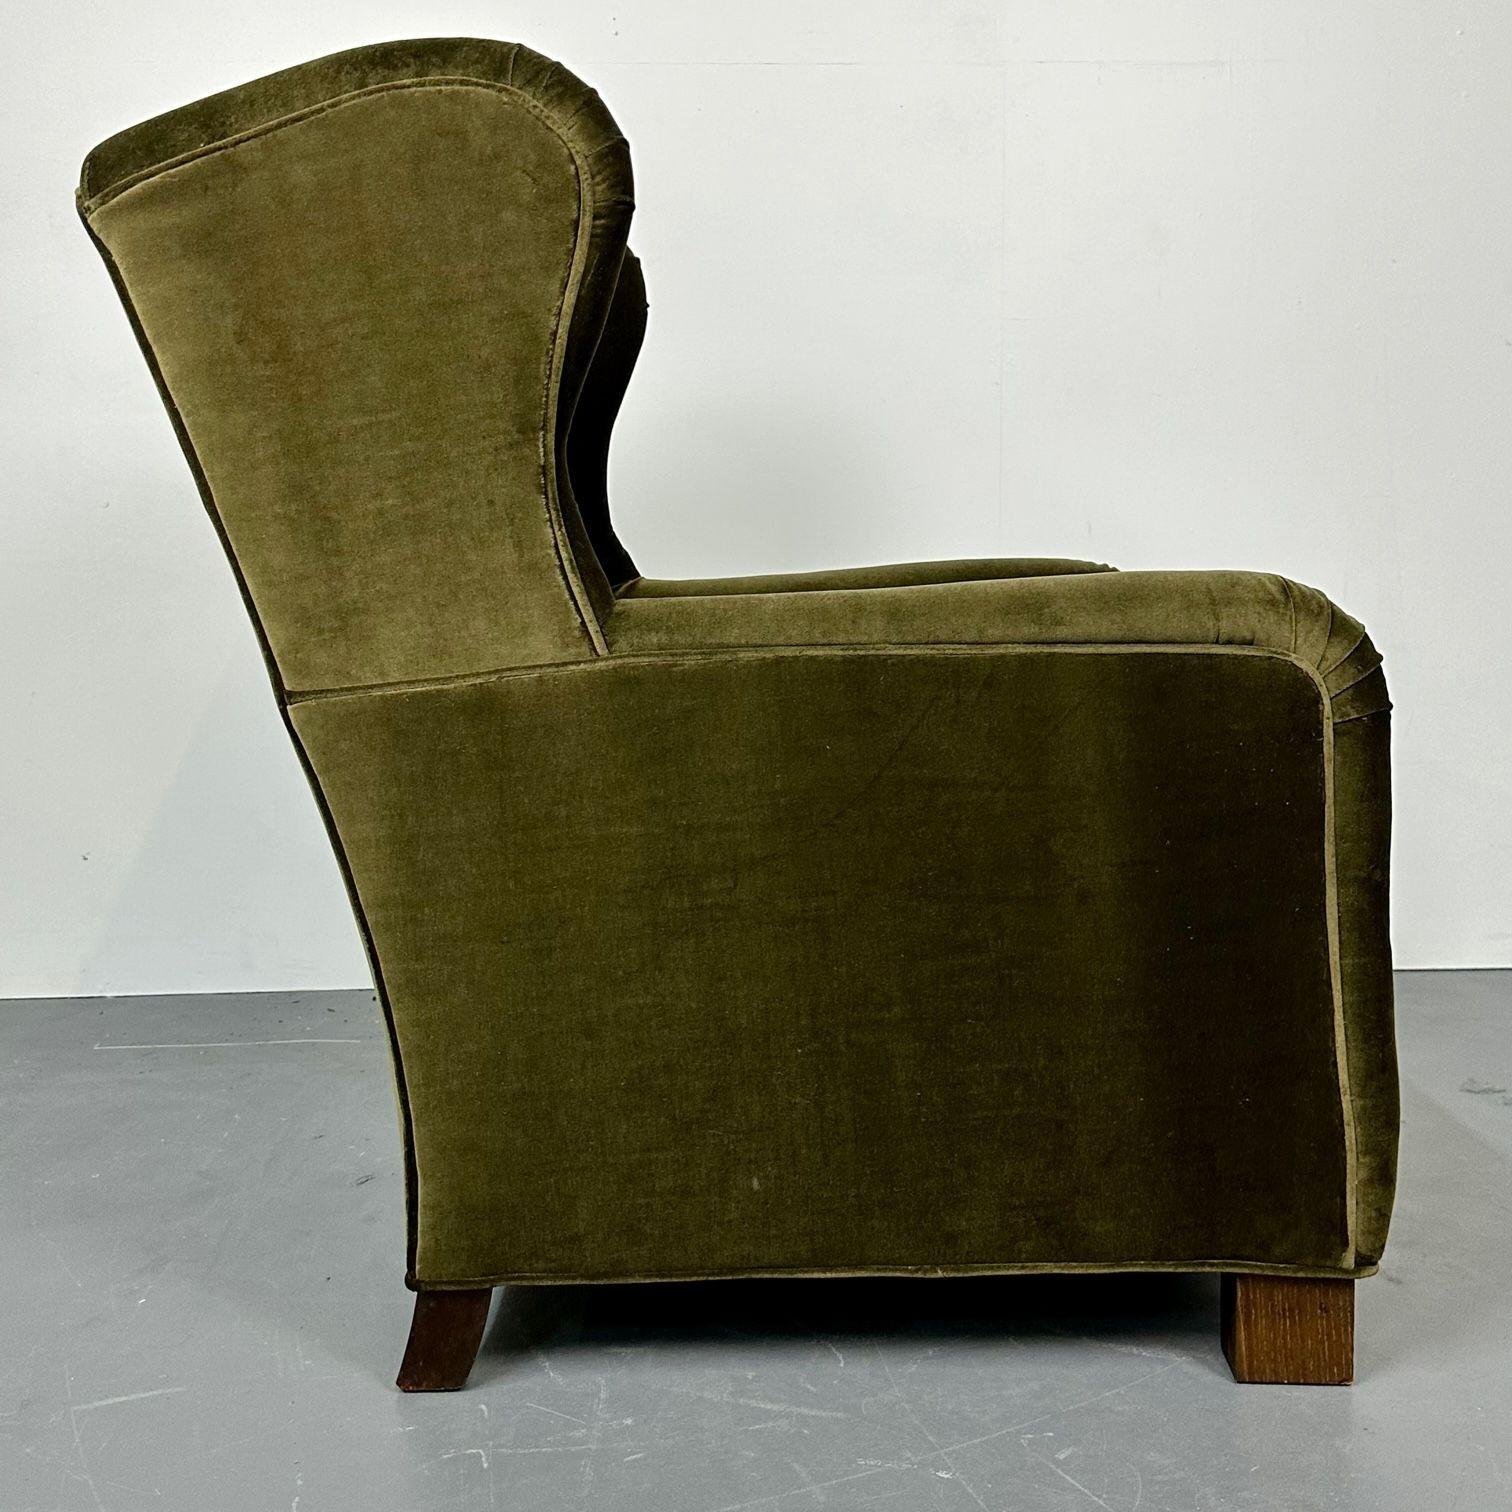 Mid-20th Century Danish Cabinetmaker Wingback / Lounge Chair, Scroll Arm, Flemming Lassen Style For Sale